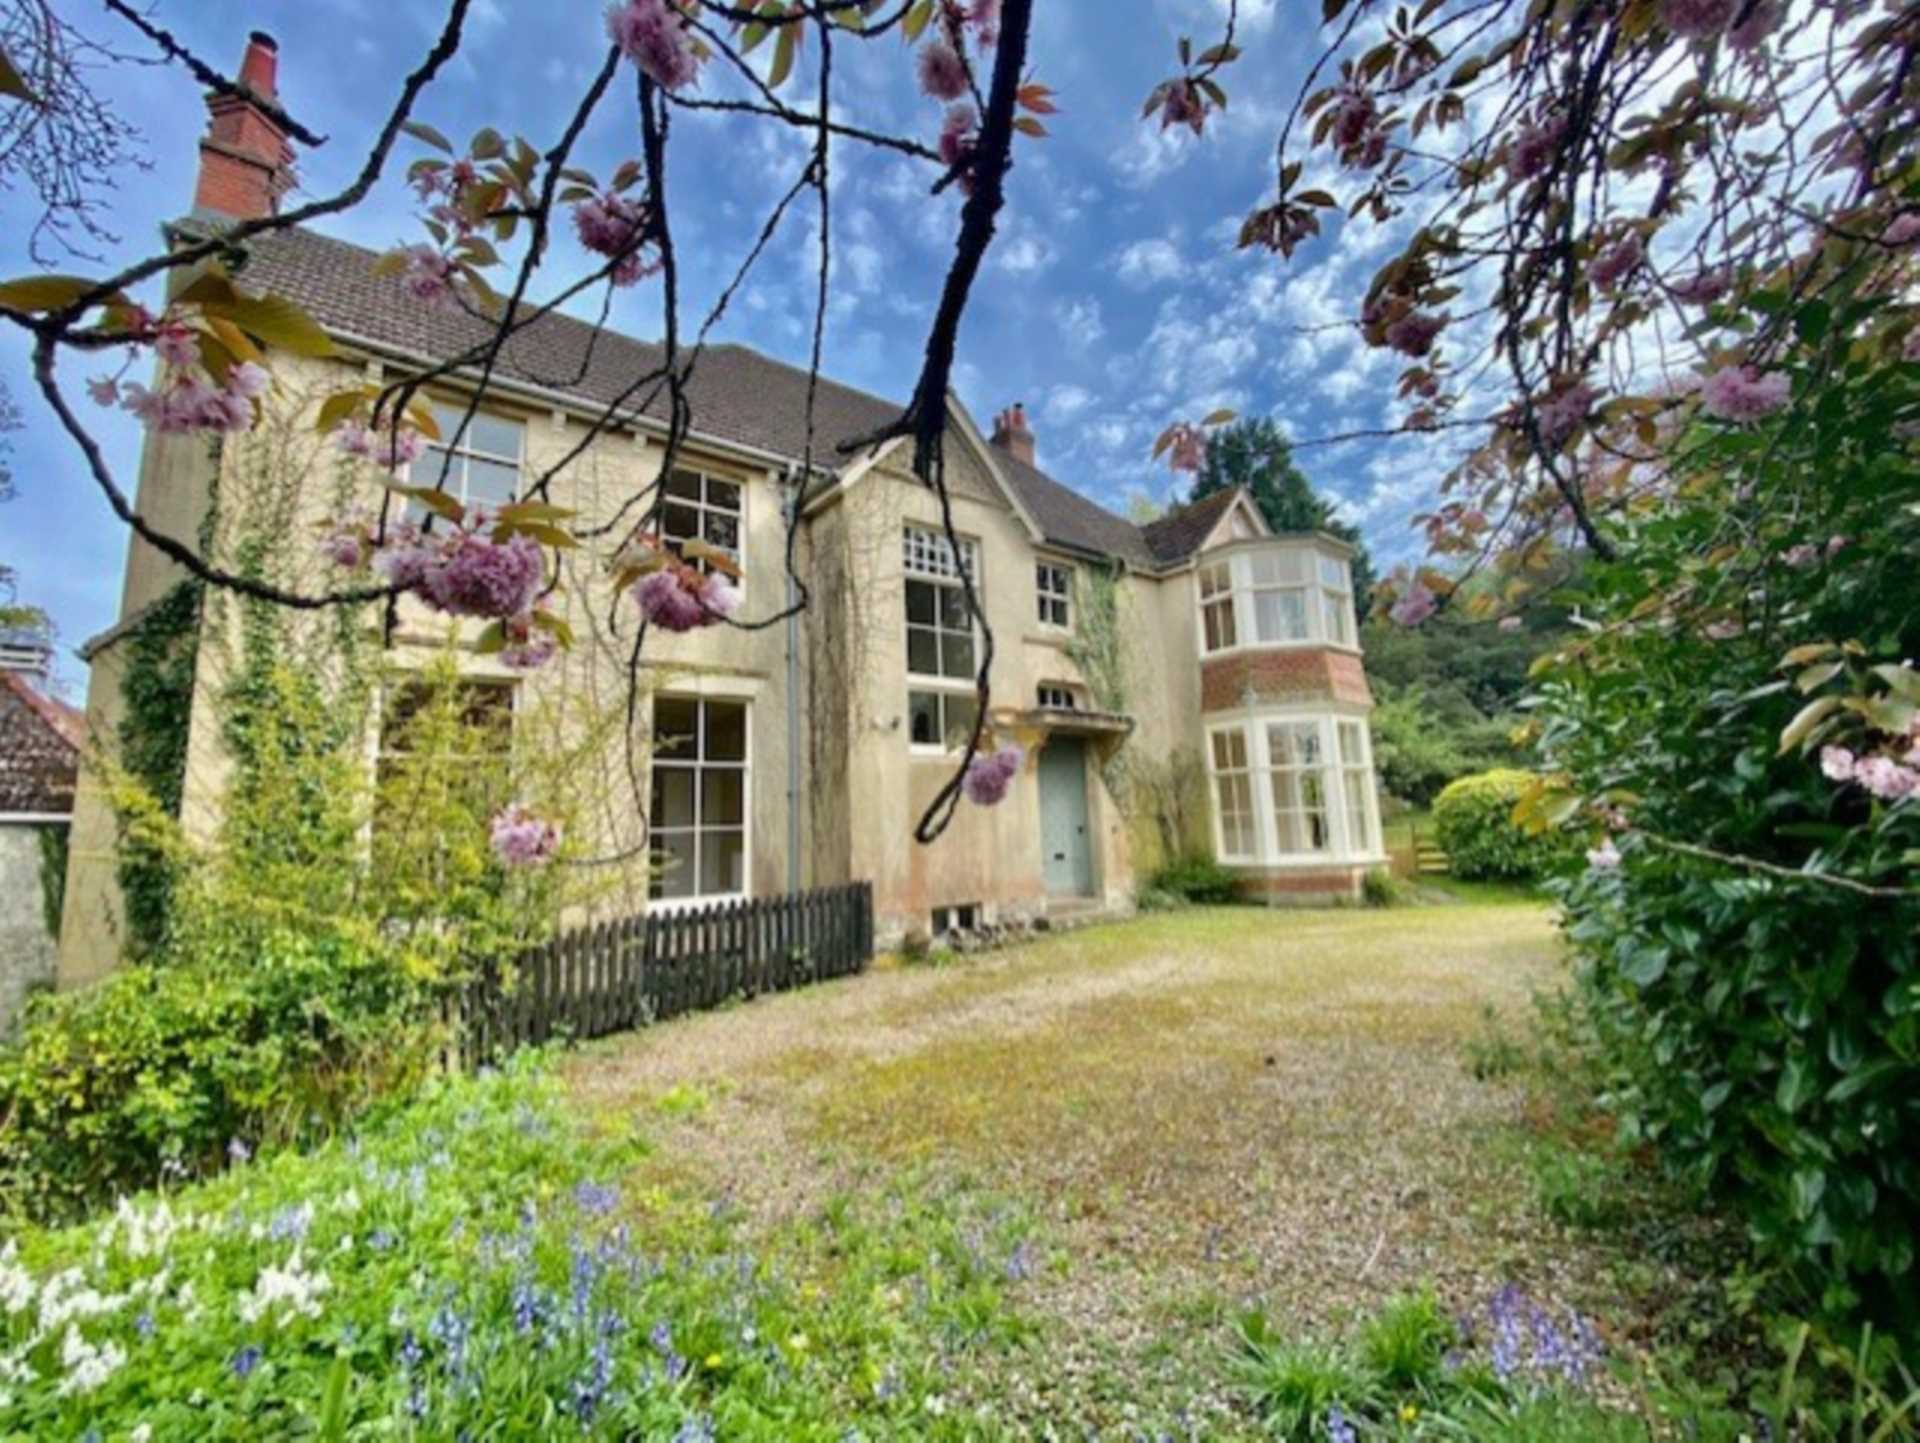 Swallows Property Letting - 4 Bedroom Country House, Church Street, Horningsham